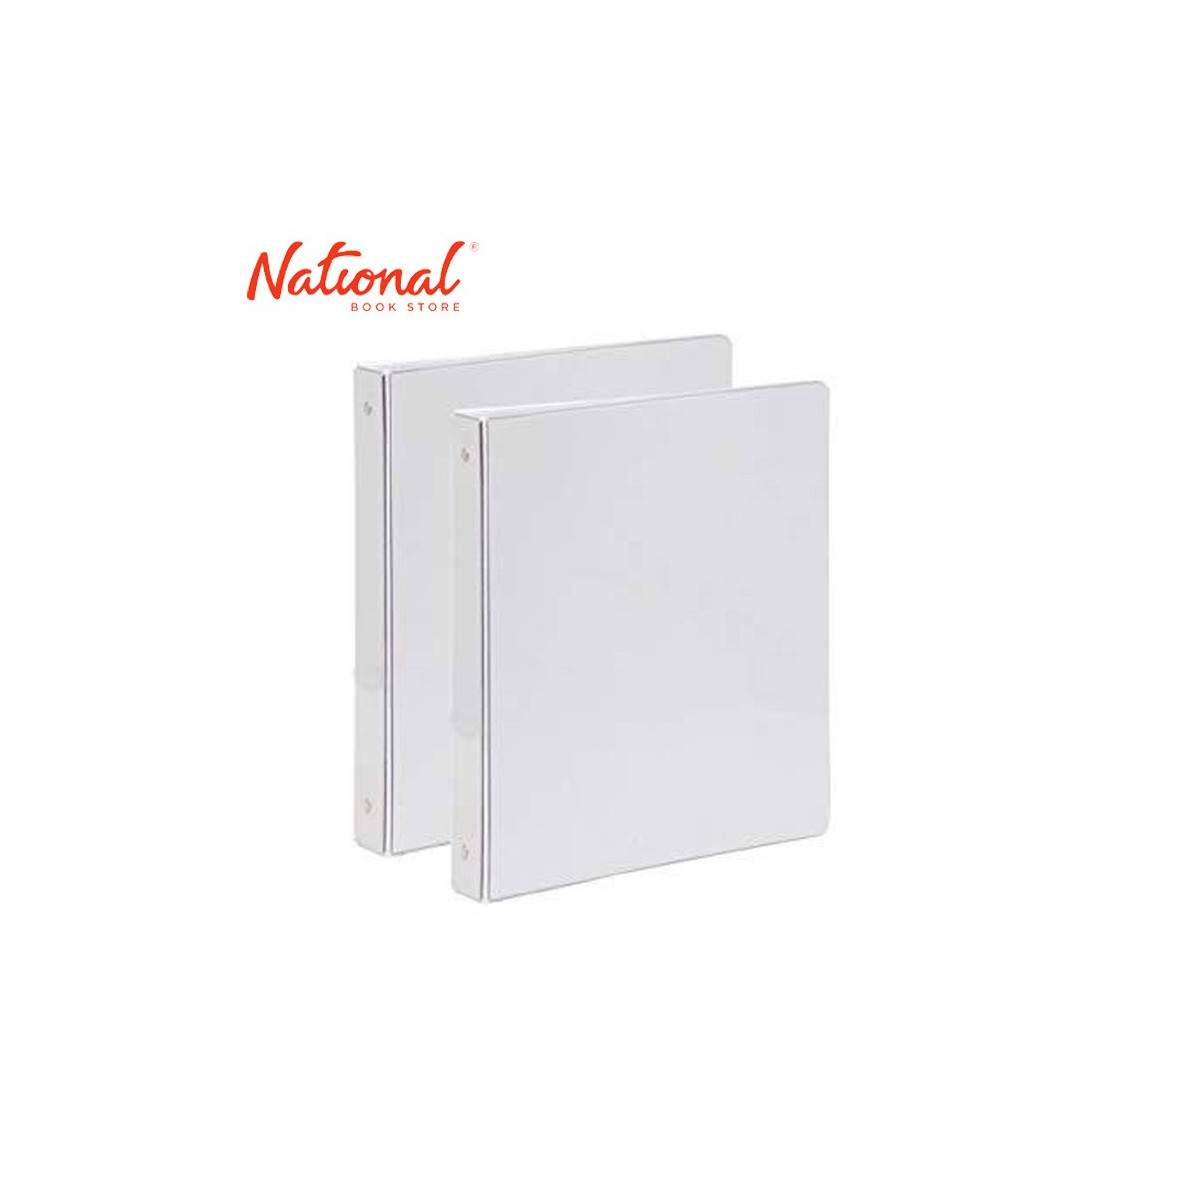 SEAGULL RING BINDER 3R CVP25 A4 2.5IN DTYPE PVC COVER W FRONT & BACK OUTER POCKETS, WHITE